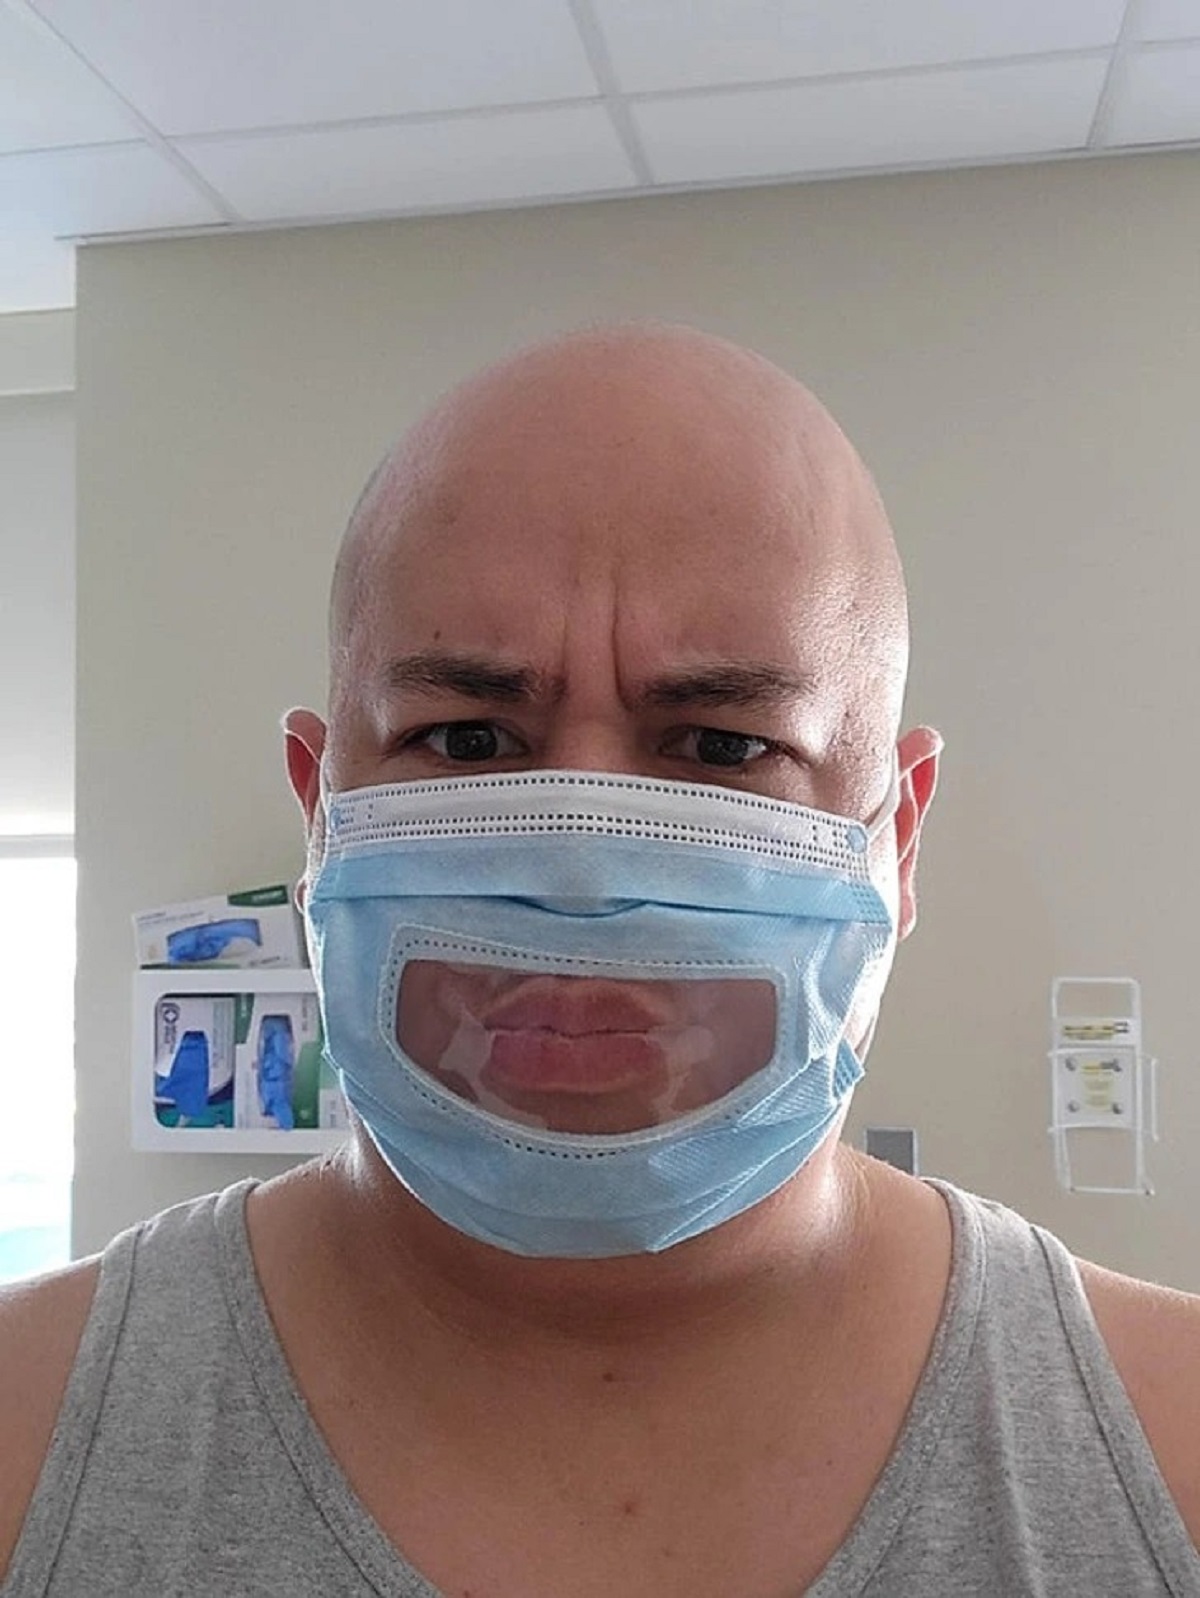 The NICU at the hospital has masks with mouth windows so the baby can see your expressions.